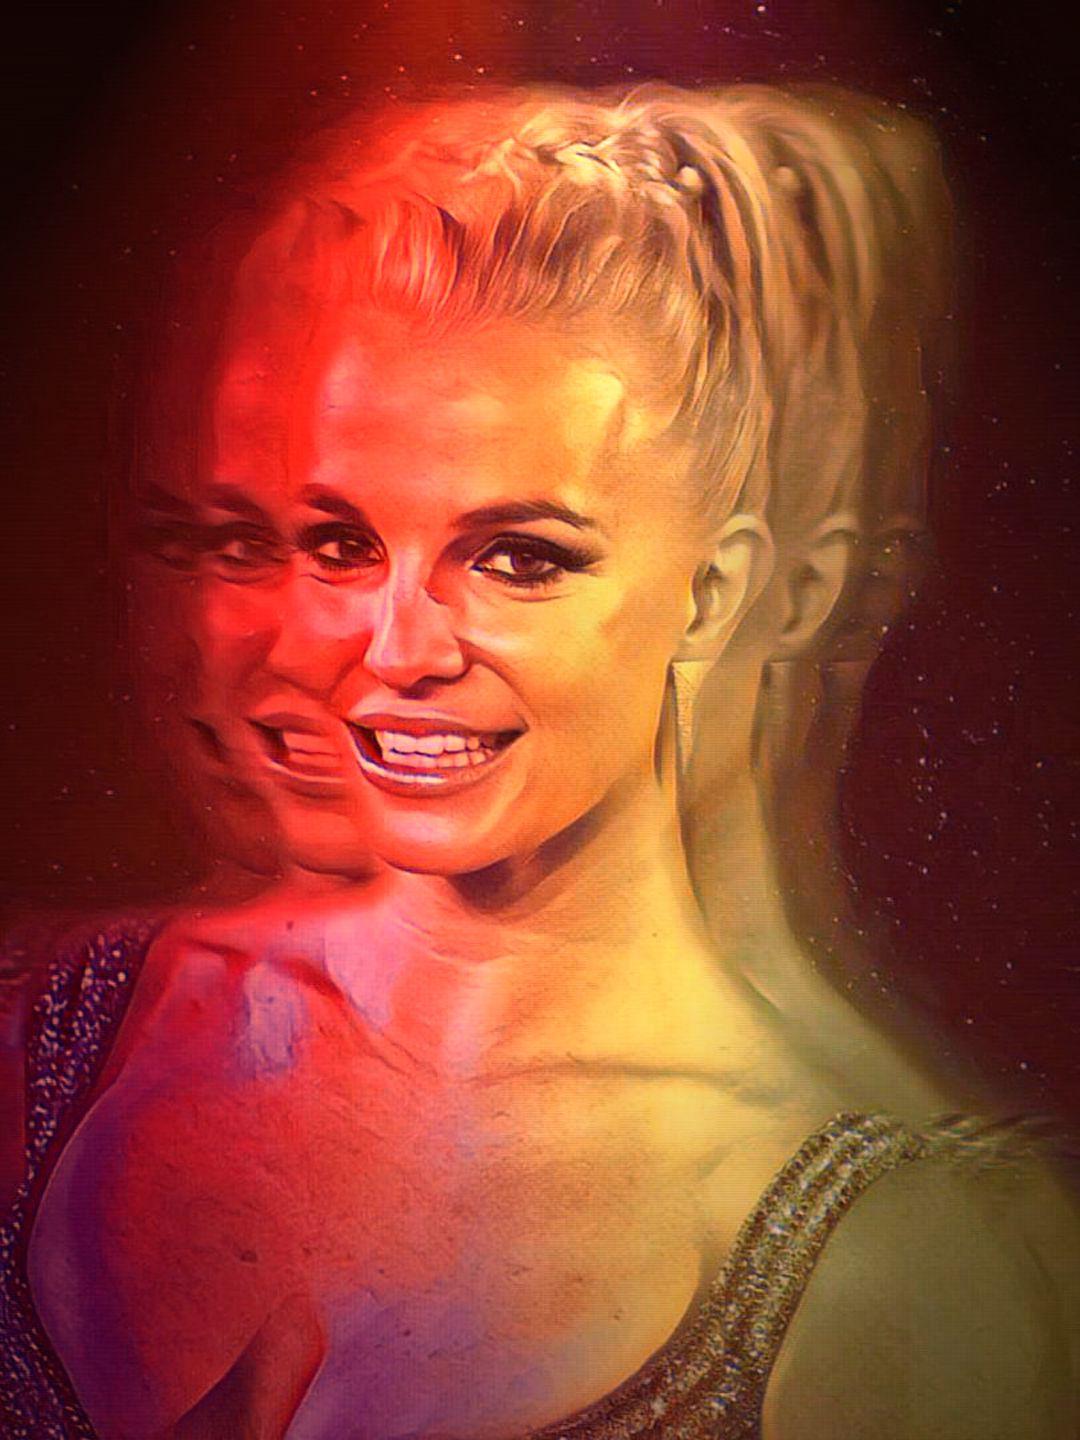 Britney Spears # 3 - Celeb ART - Beautiful Artworks of Celebrities,  Footballers, Politicians and Famous People in World | OpenSea